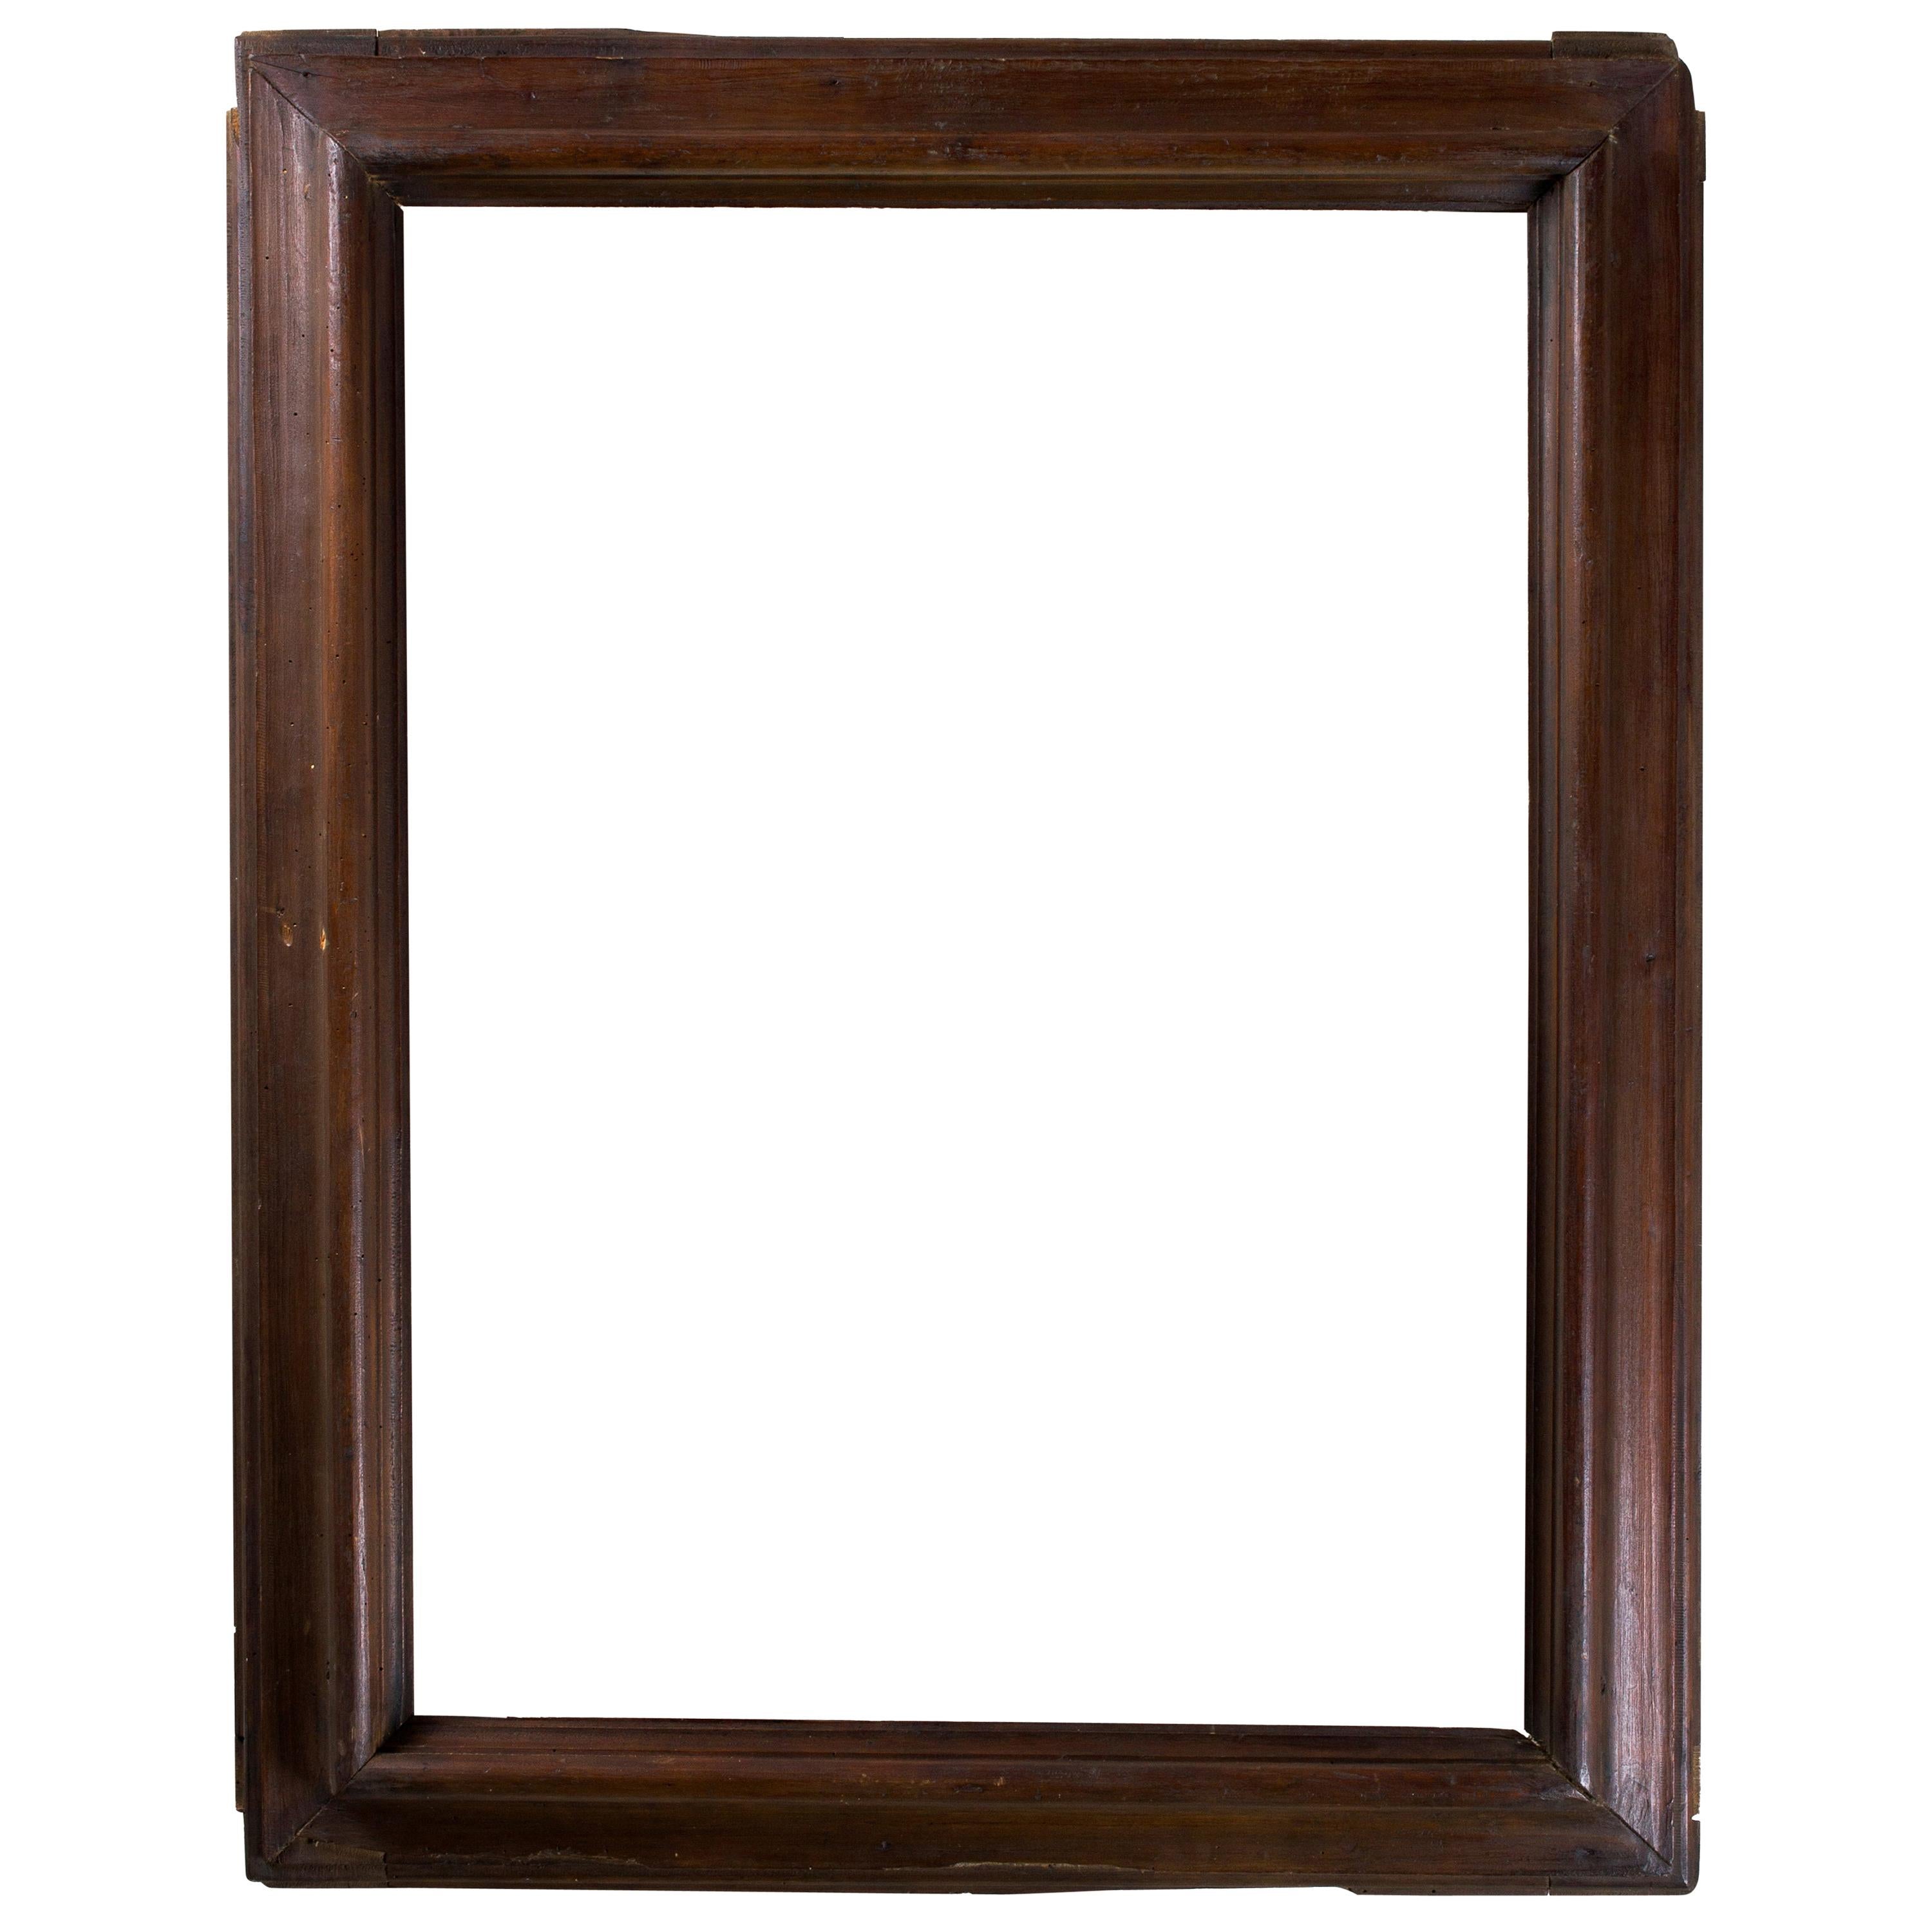 Natural Wood Frame, Central Italy, Second Half of the 17th Century